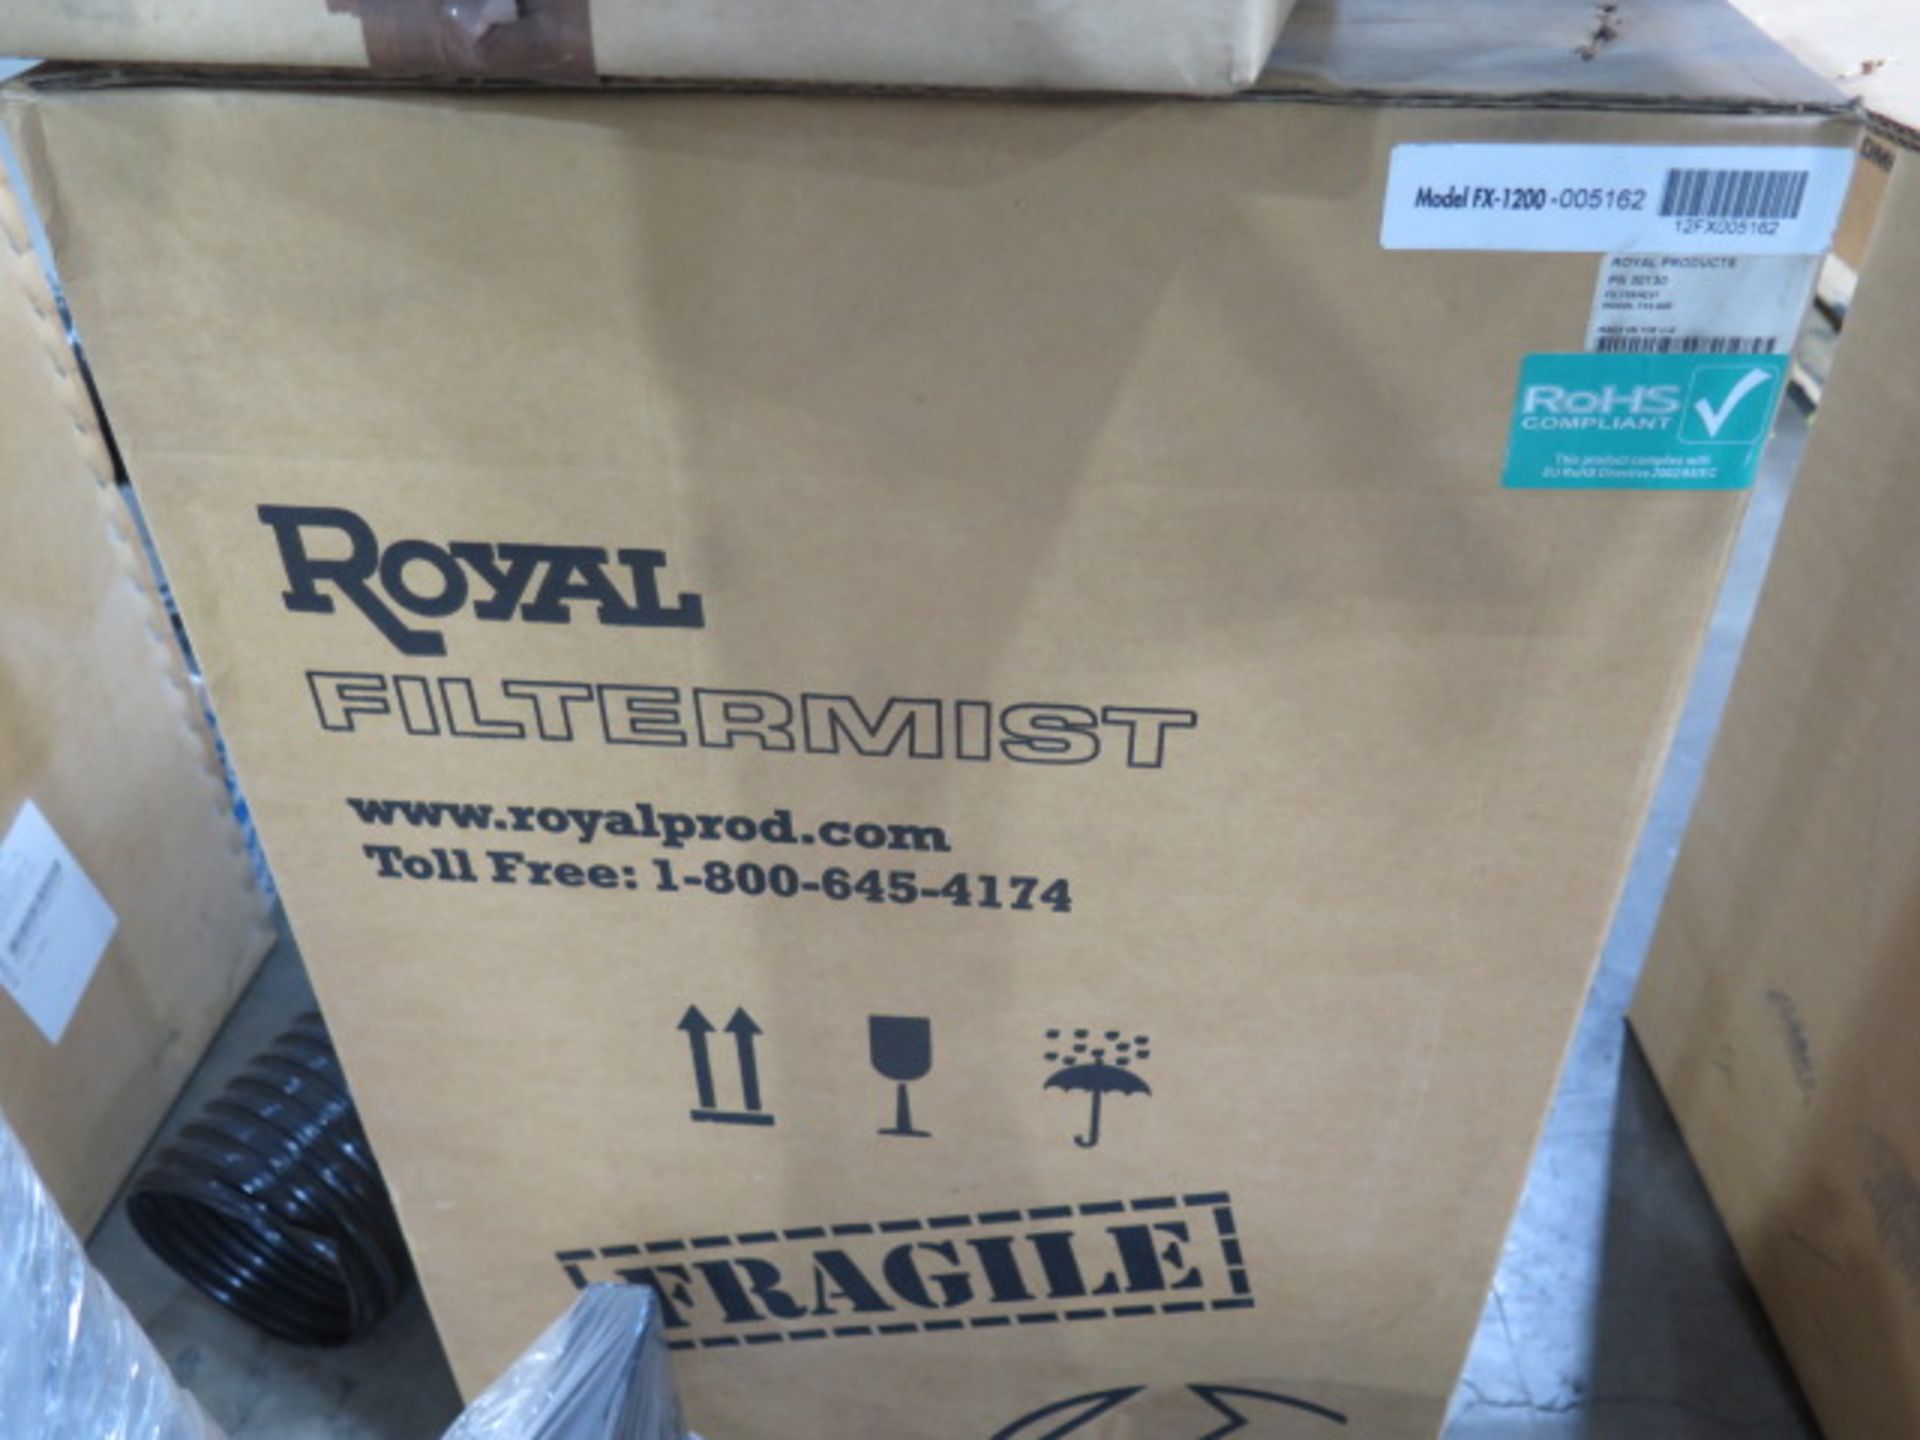 Royal FX-1200 "Filtermist" Unit (NEW) w/ Controls, and Pedestal Mount (SOLD AS-IS - NO WARRANTY) - Image 2 of 7